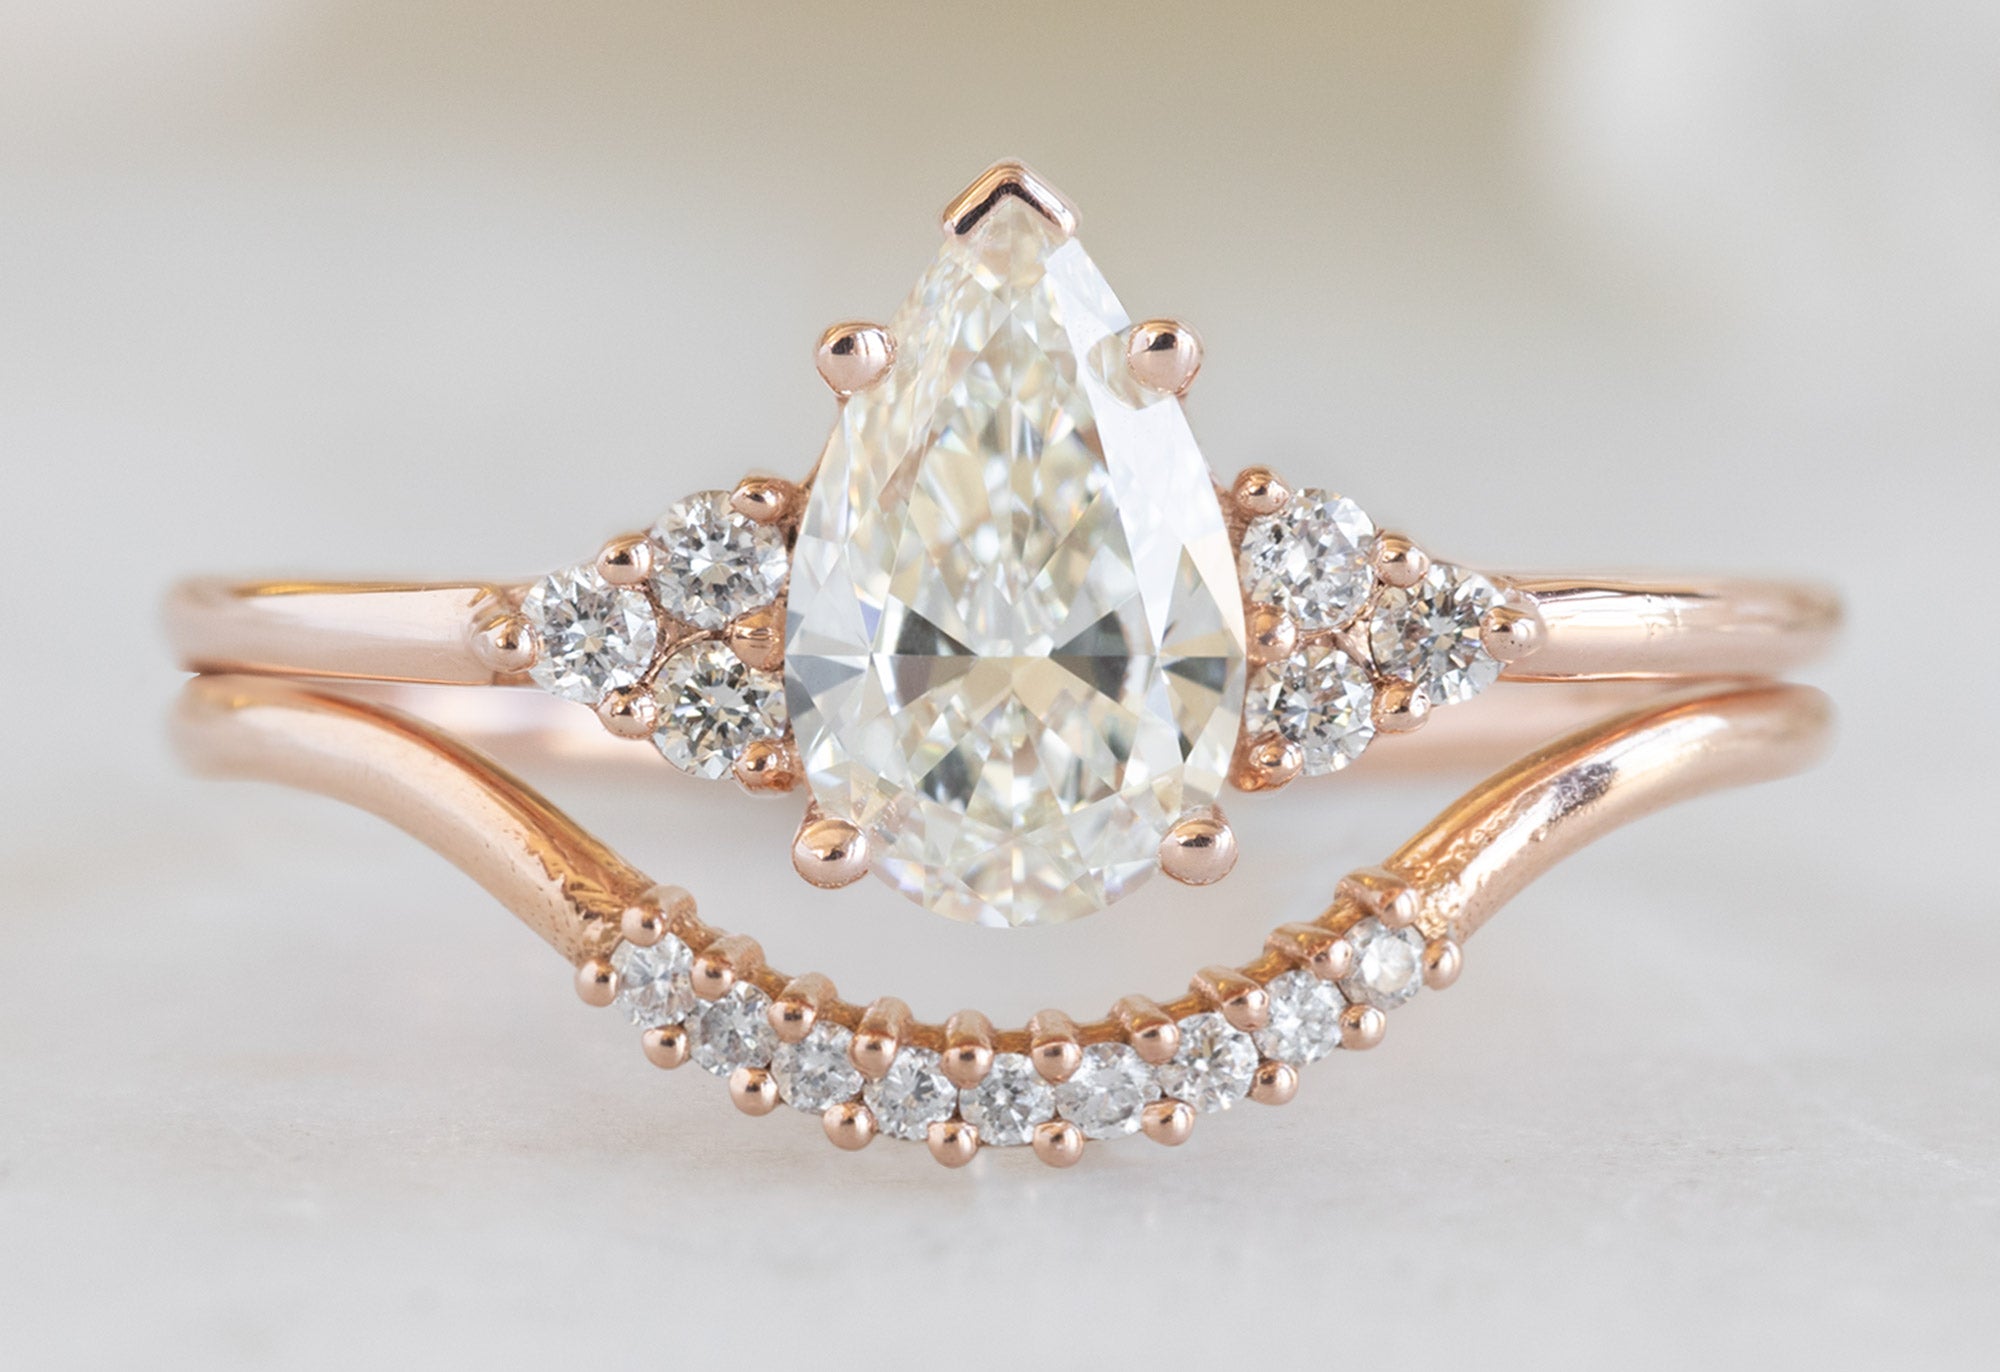 The Ivy Ring with a Pear-Cut White Diamond & Alexis Russell